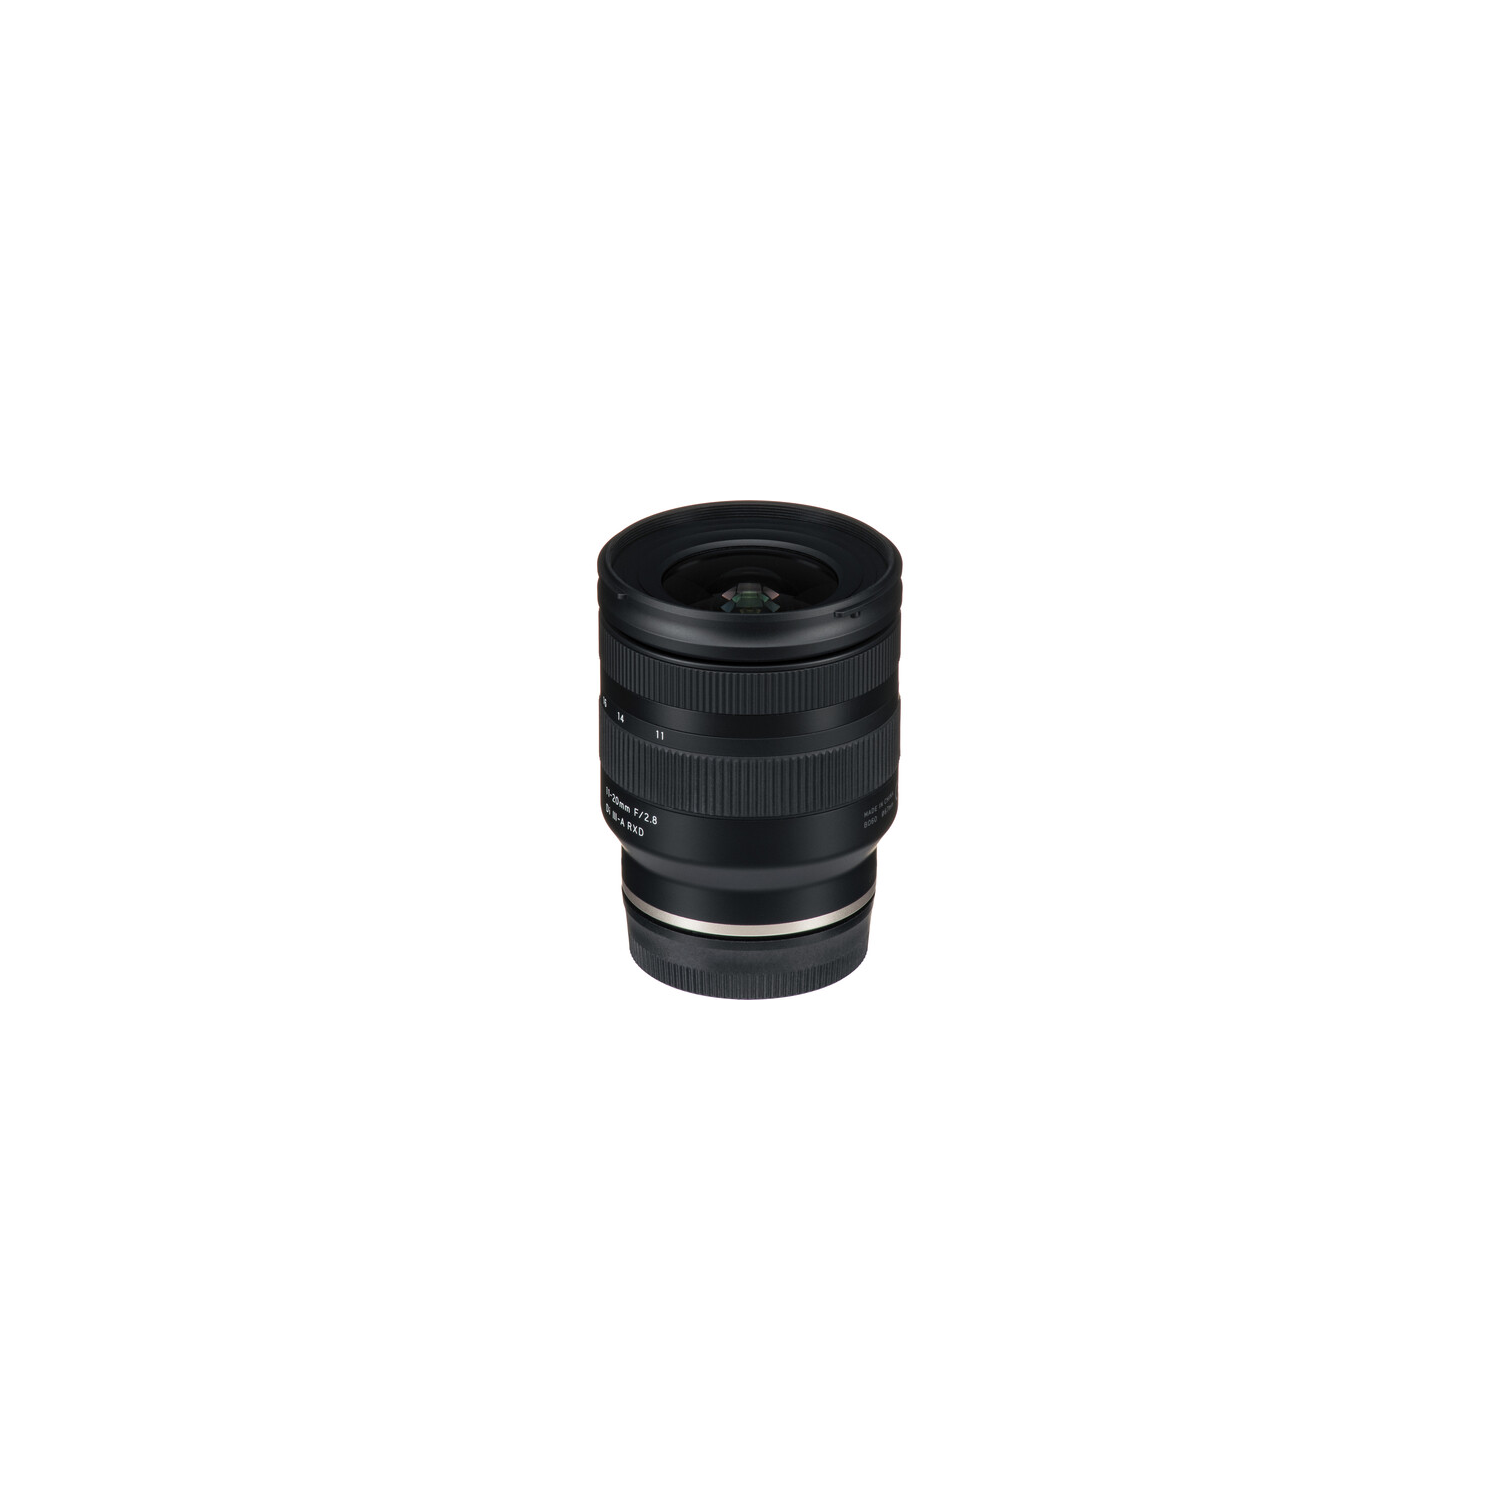 Tamron 11-20 mm f / 2,8 DI III-A RXD Lens pour Sony E